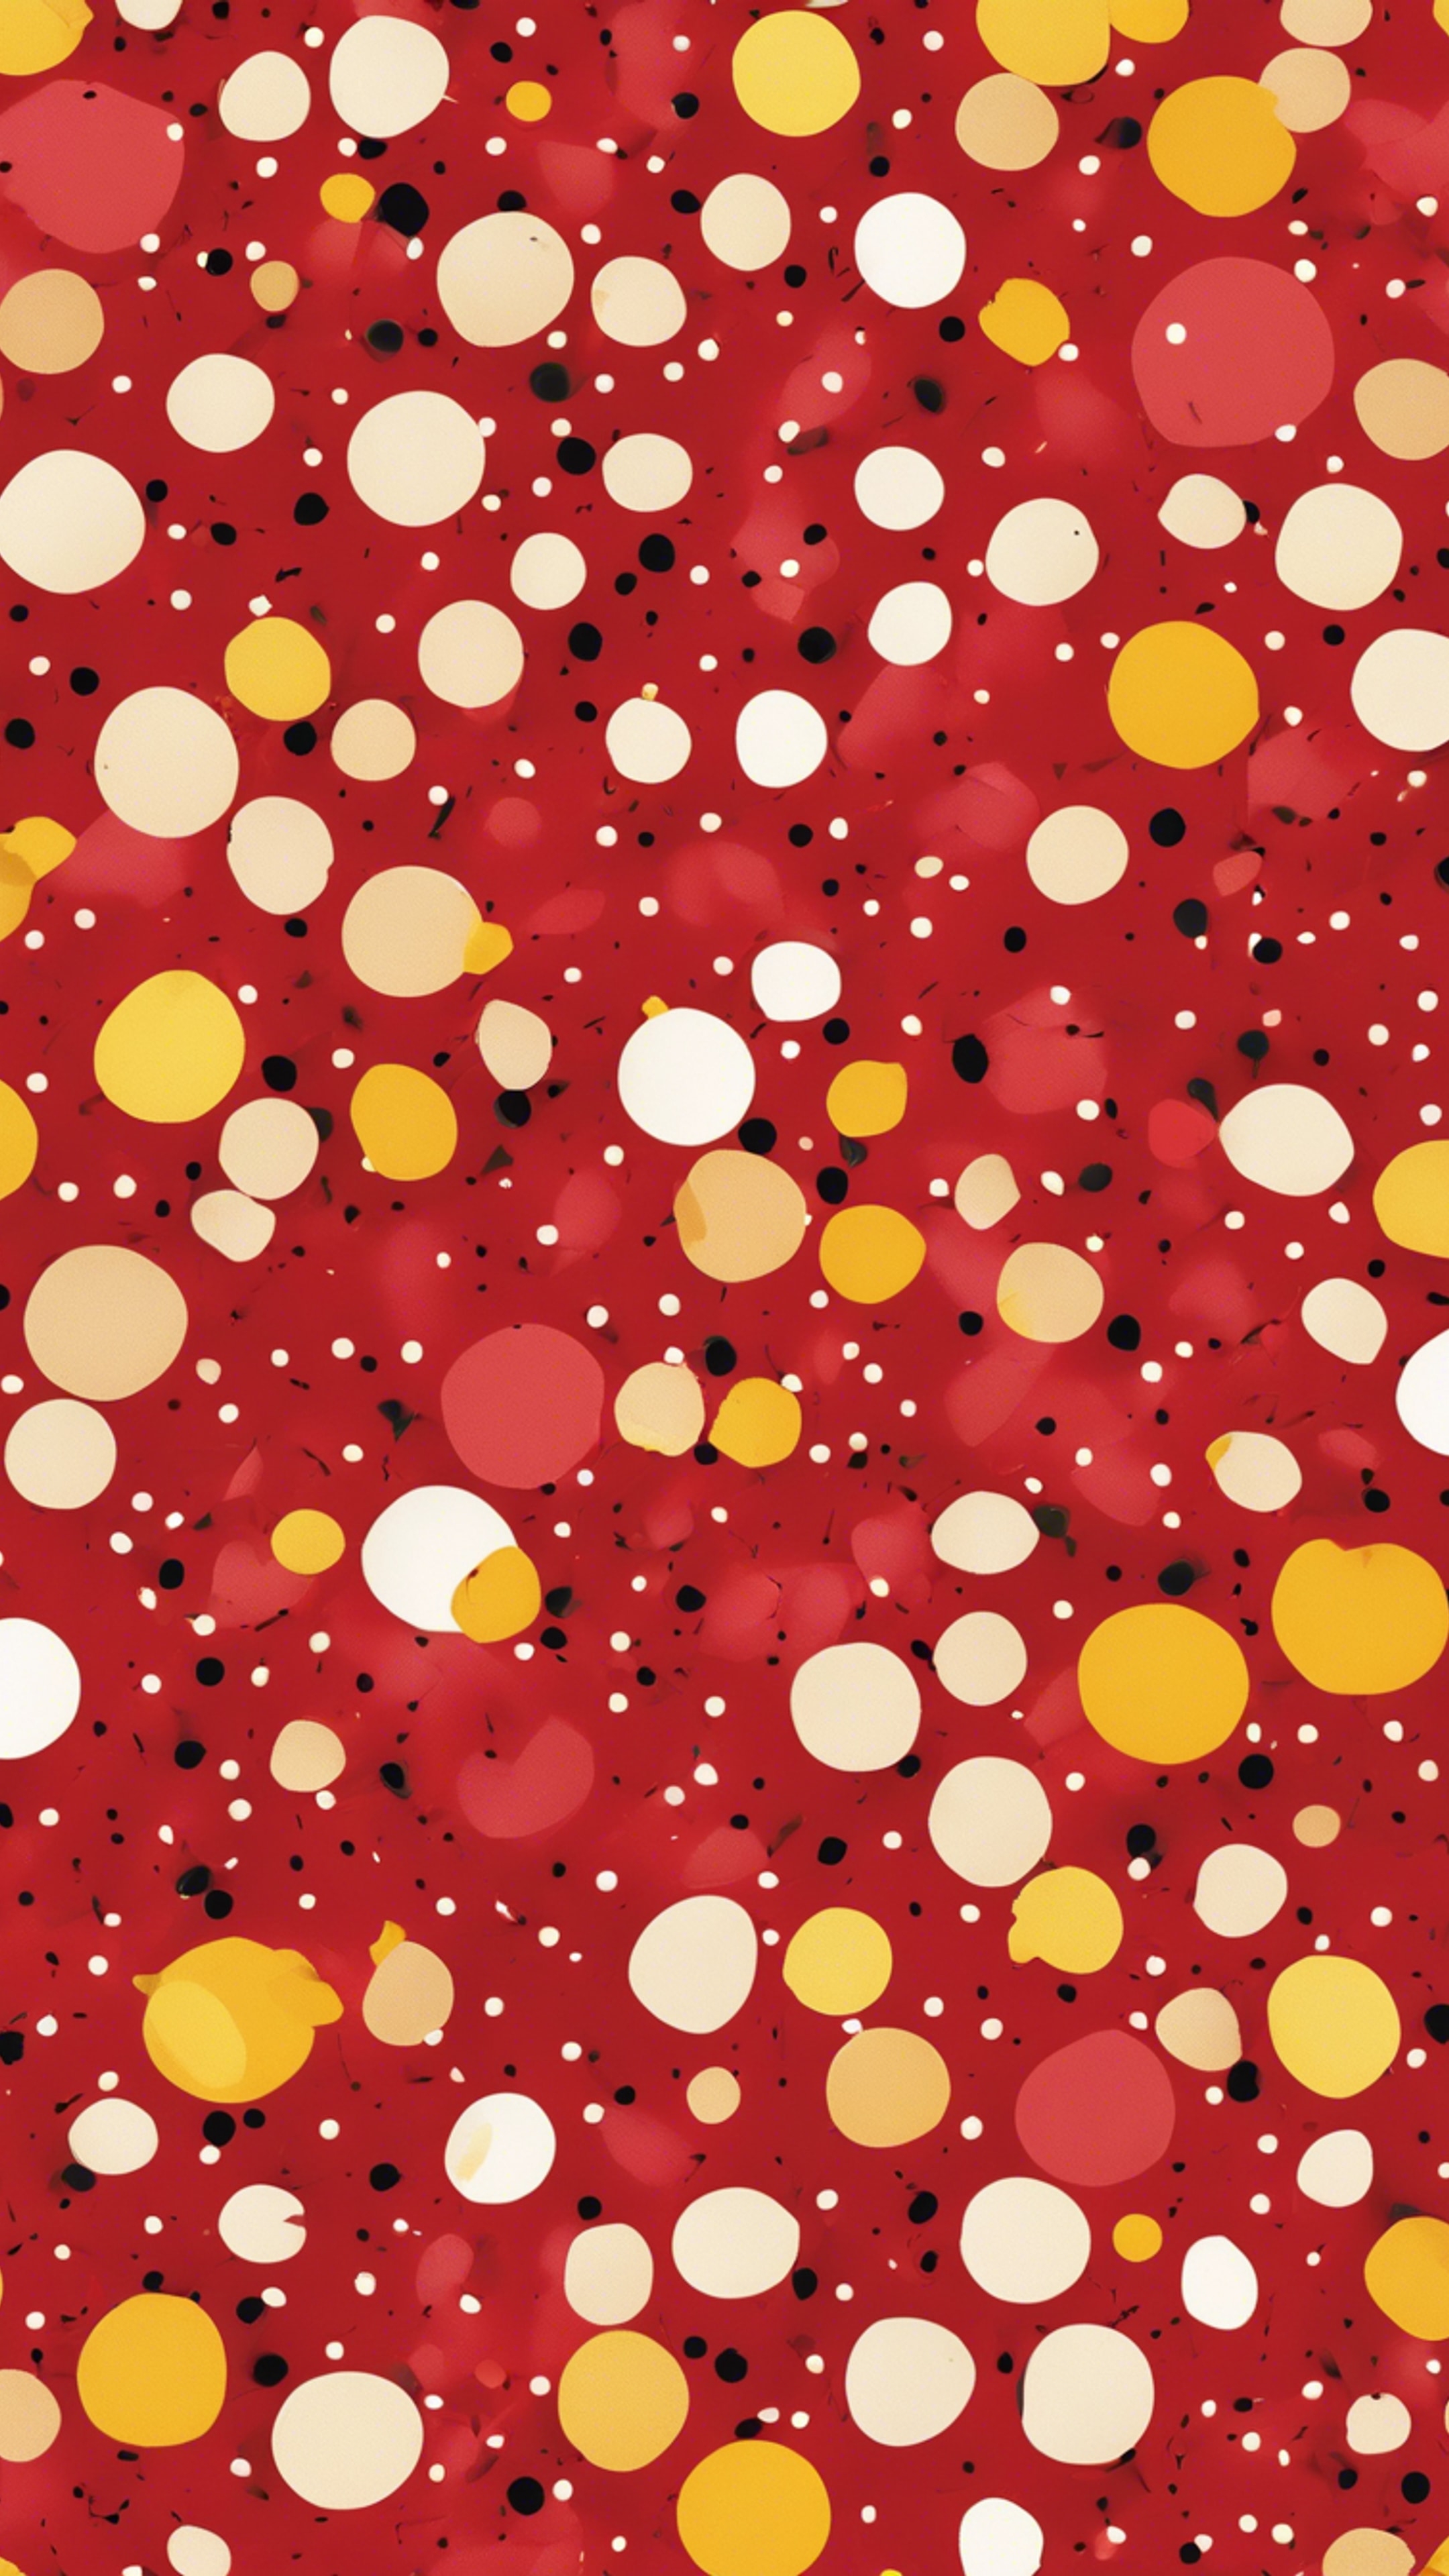 A seamless pattern of vibrant red and vivid yellow, polka dots scattered randomly. Kertas dinding[206bafc01adc43569588]